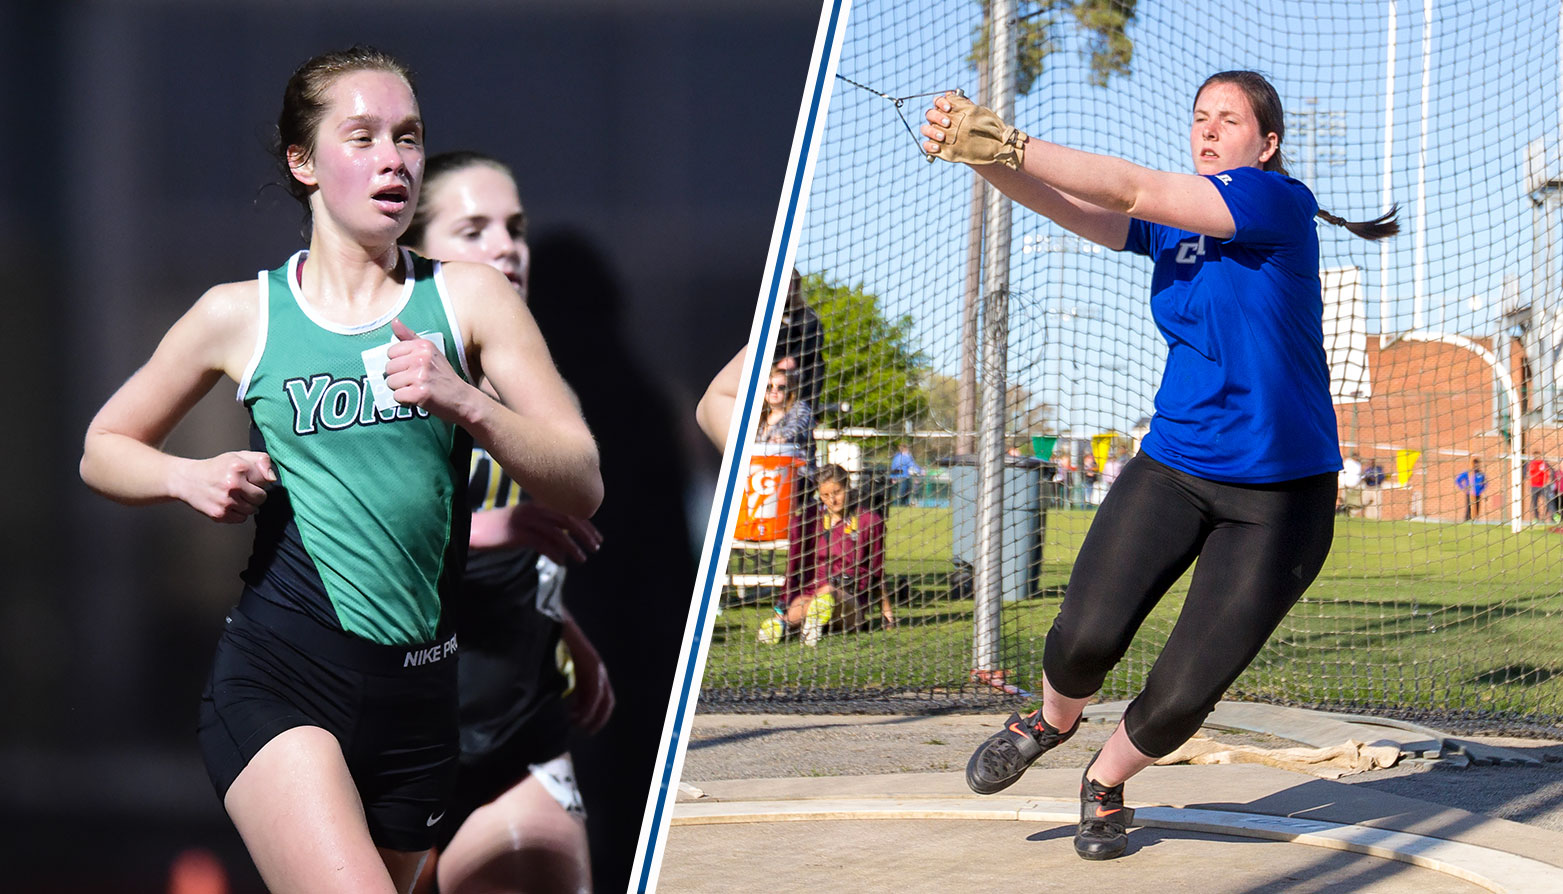 York's Abby Sykes & CNU's Sarah Johnson Selected CAC Women's Track & Field Athletes of the Week